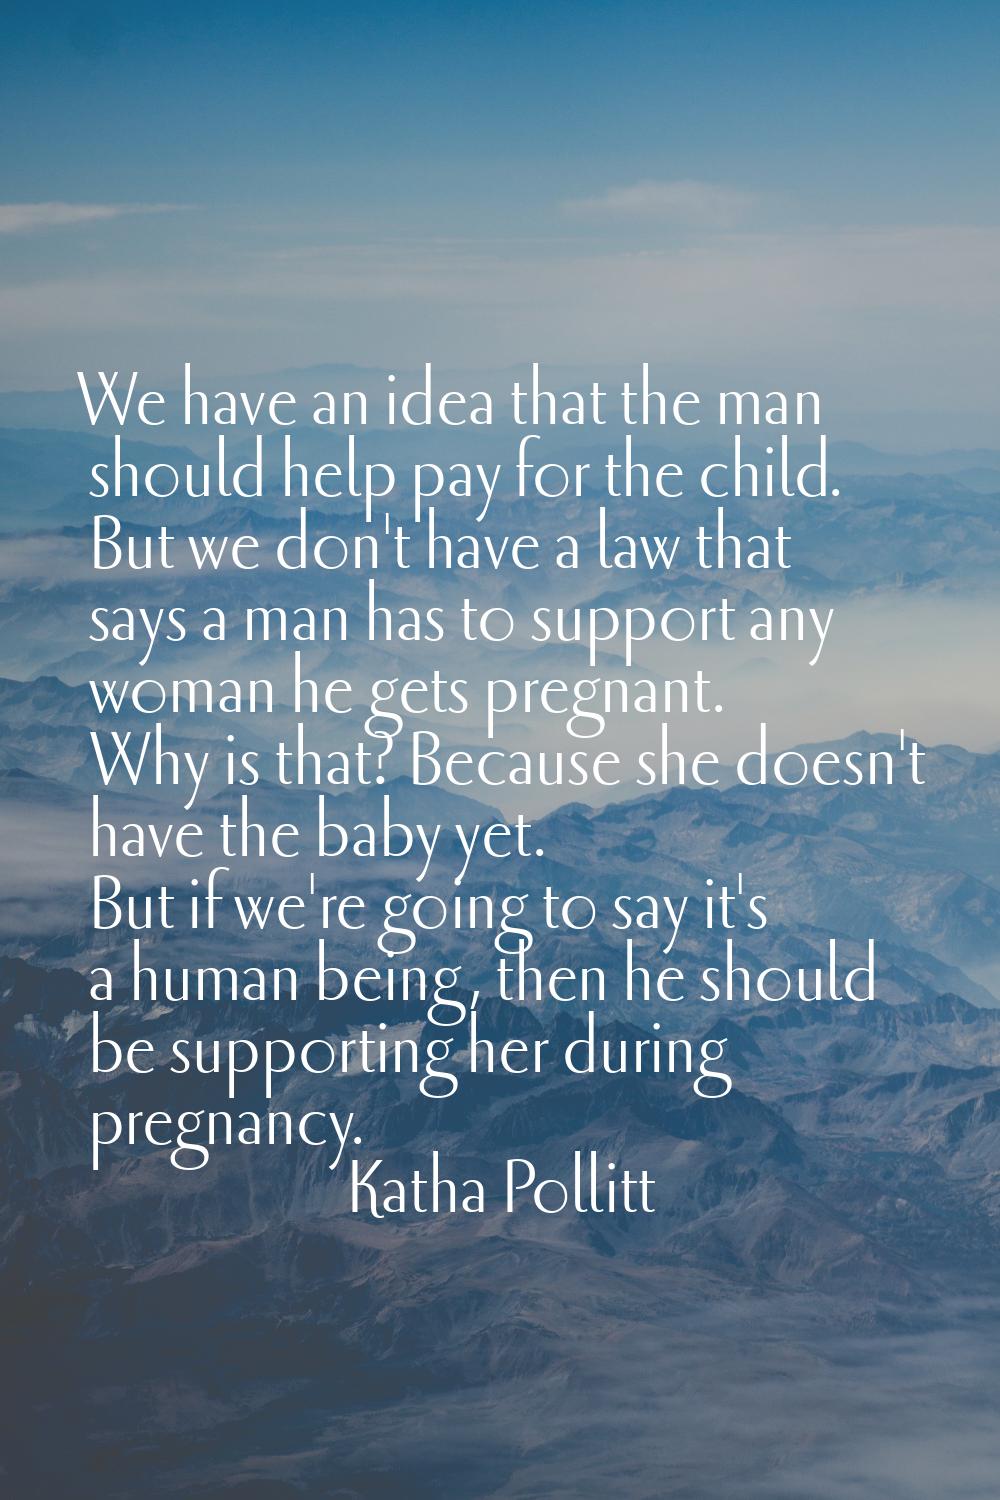 We have an idea that the man should help pay for the child. But we don't have a law that says a man